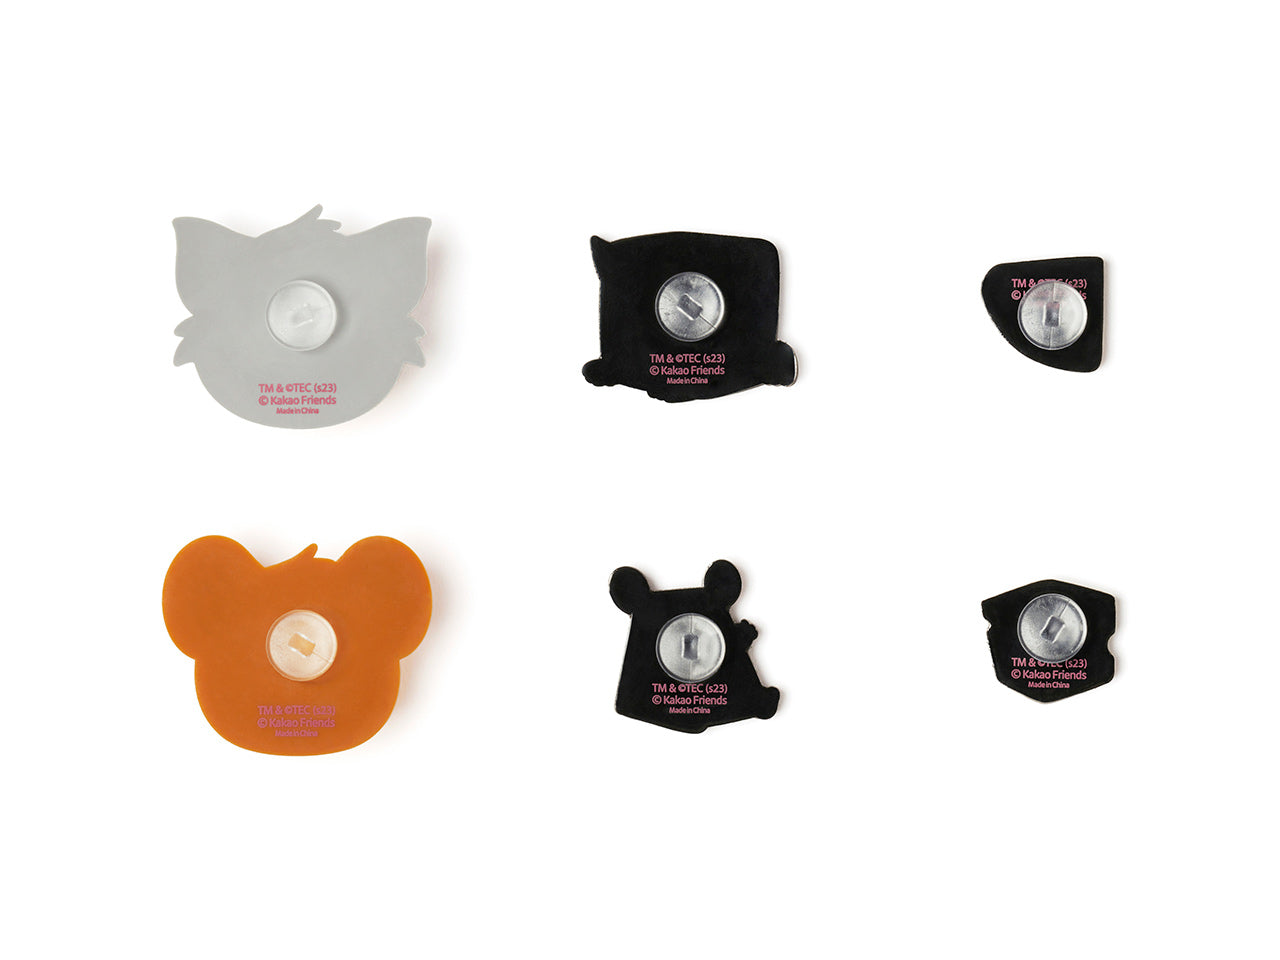 [KAKAO FRIENDS] X TOM & JERRY Silicone Charm OFFICIAL MD